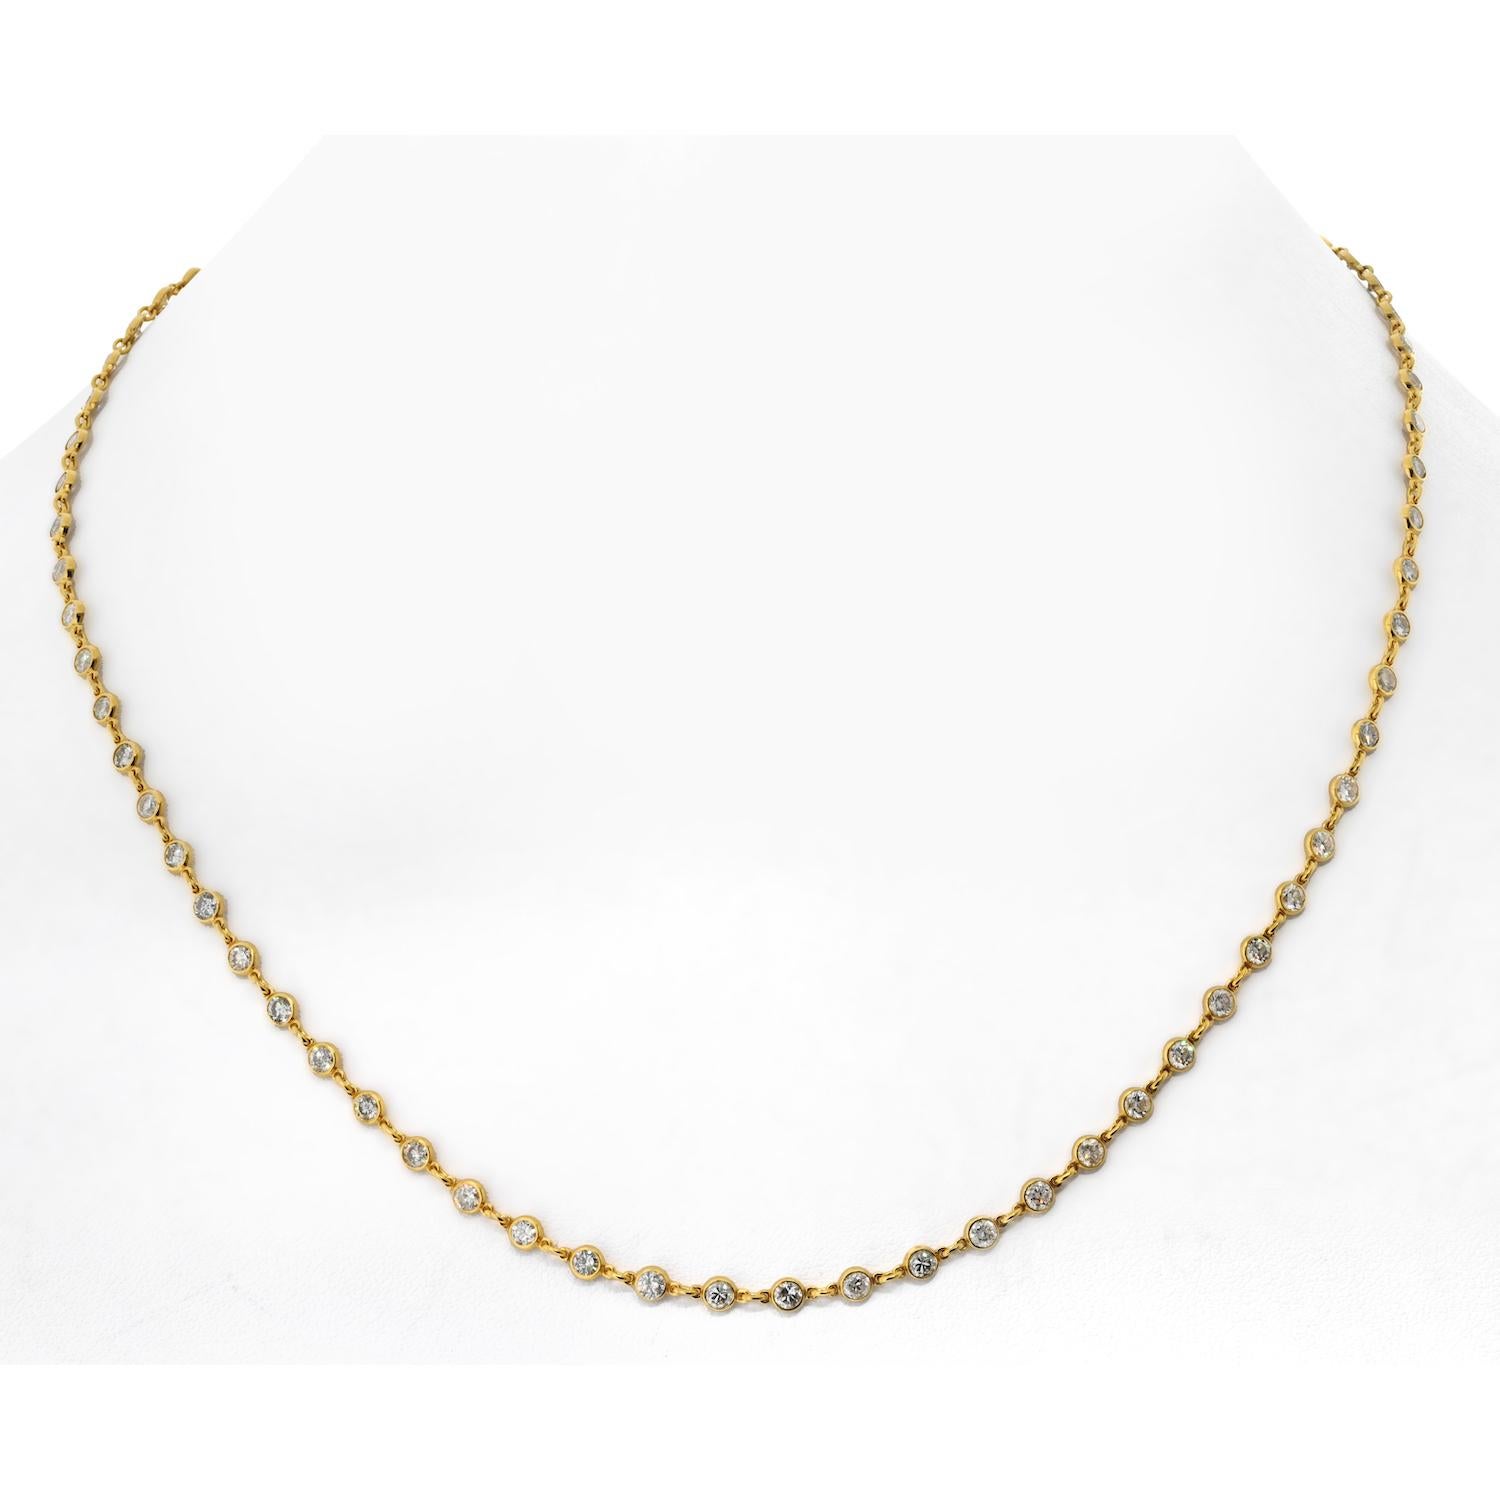 Introducing a truly enchanting piece of jewelry – the Beautiful Handmade Diamond by the Yard Necklace in 18K Yellow Gold. 

This exquisite necklace features a remarkable 6.02carats of natural round brilliant-cut diamonds, each hand-set in radiant